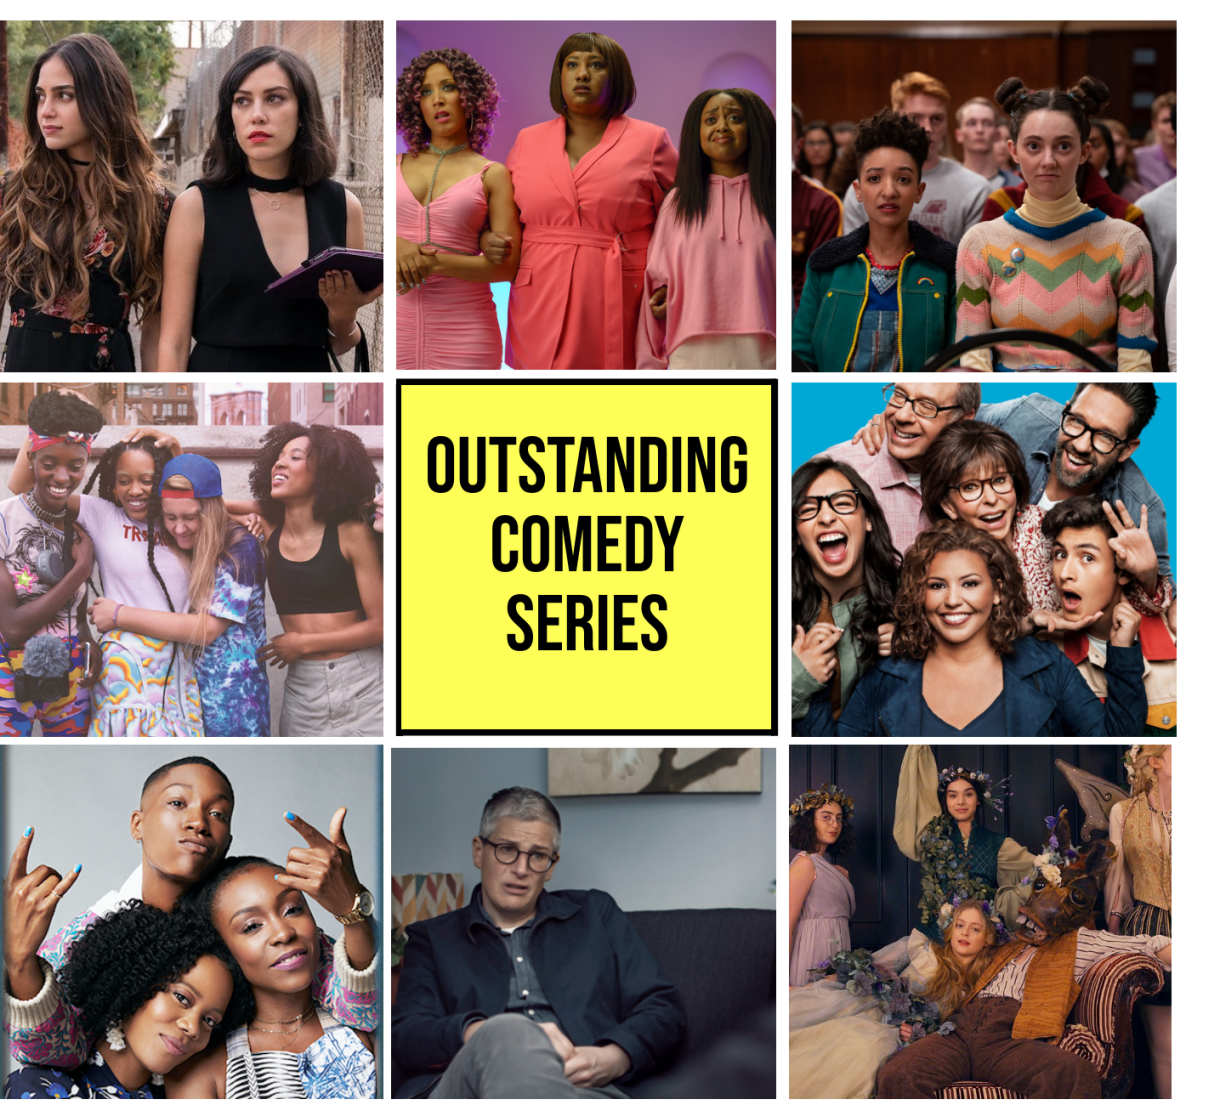 Top Row: Vida (Starz), A Black Lady Sketch Show (HBO), Sex Education (Netflix)
Middle Row: Betty (HBO), "Best Comedy Series" block, One Day at a Time  (Pop TV)
Bottom Row: Twenties (BET), Work in Progress (Showtime), Dickinson (Apple+ TV)